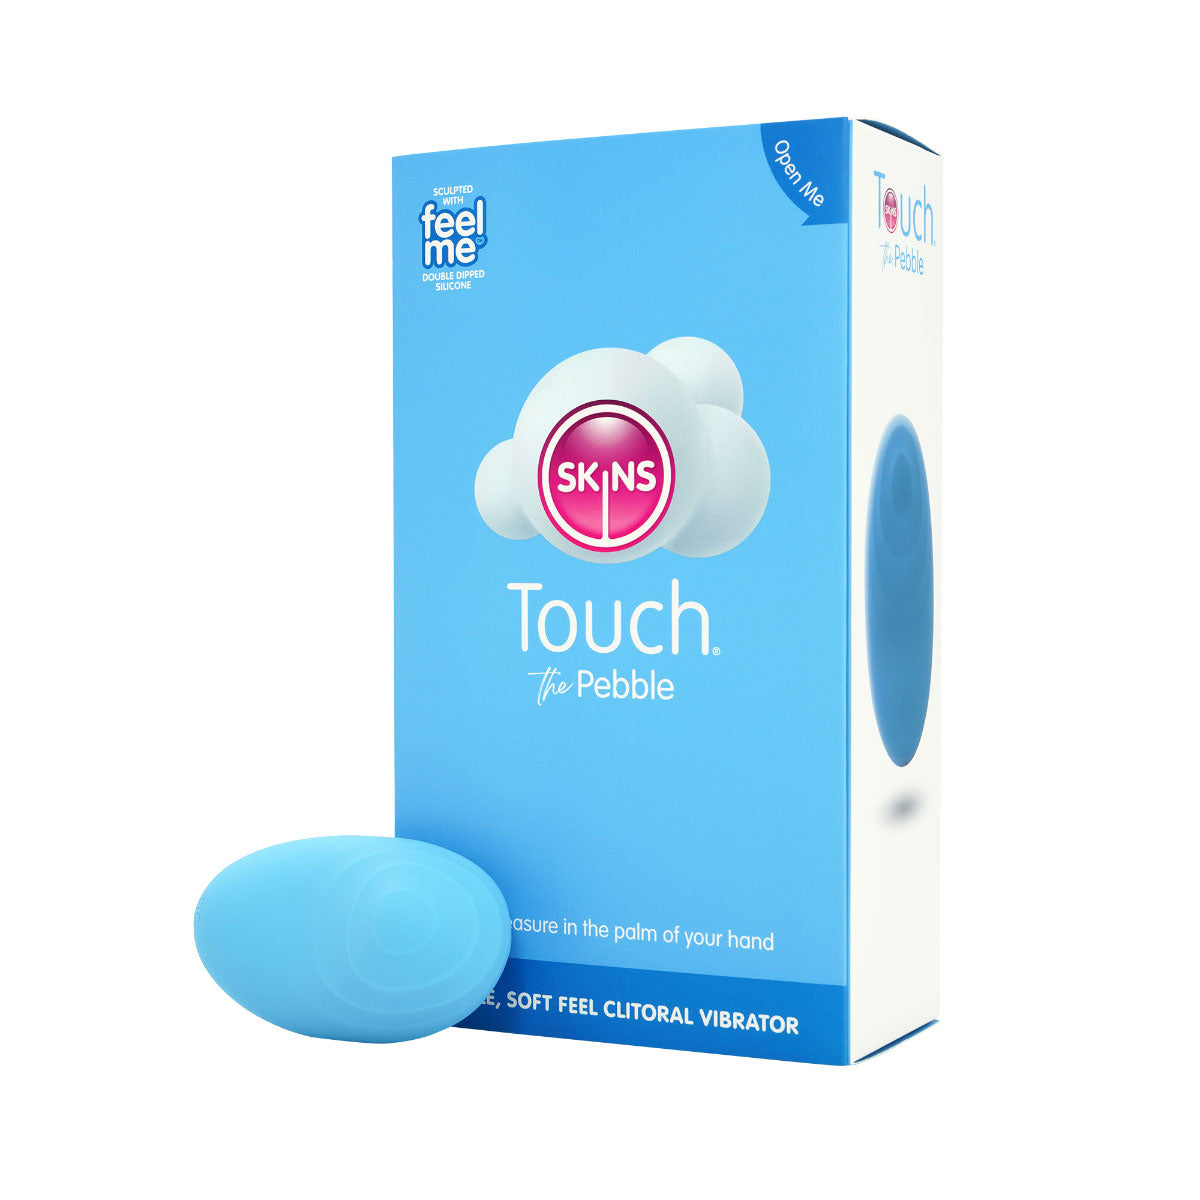 Skins Touch - the Pebble - Blue-4